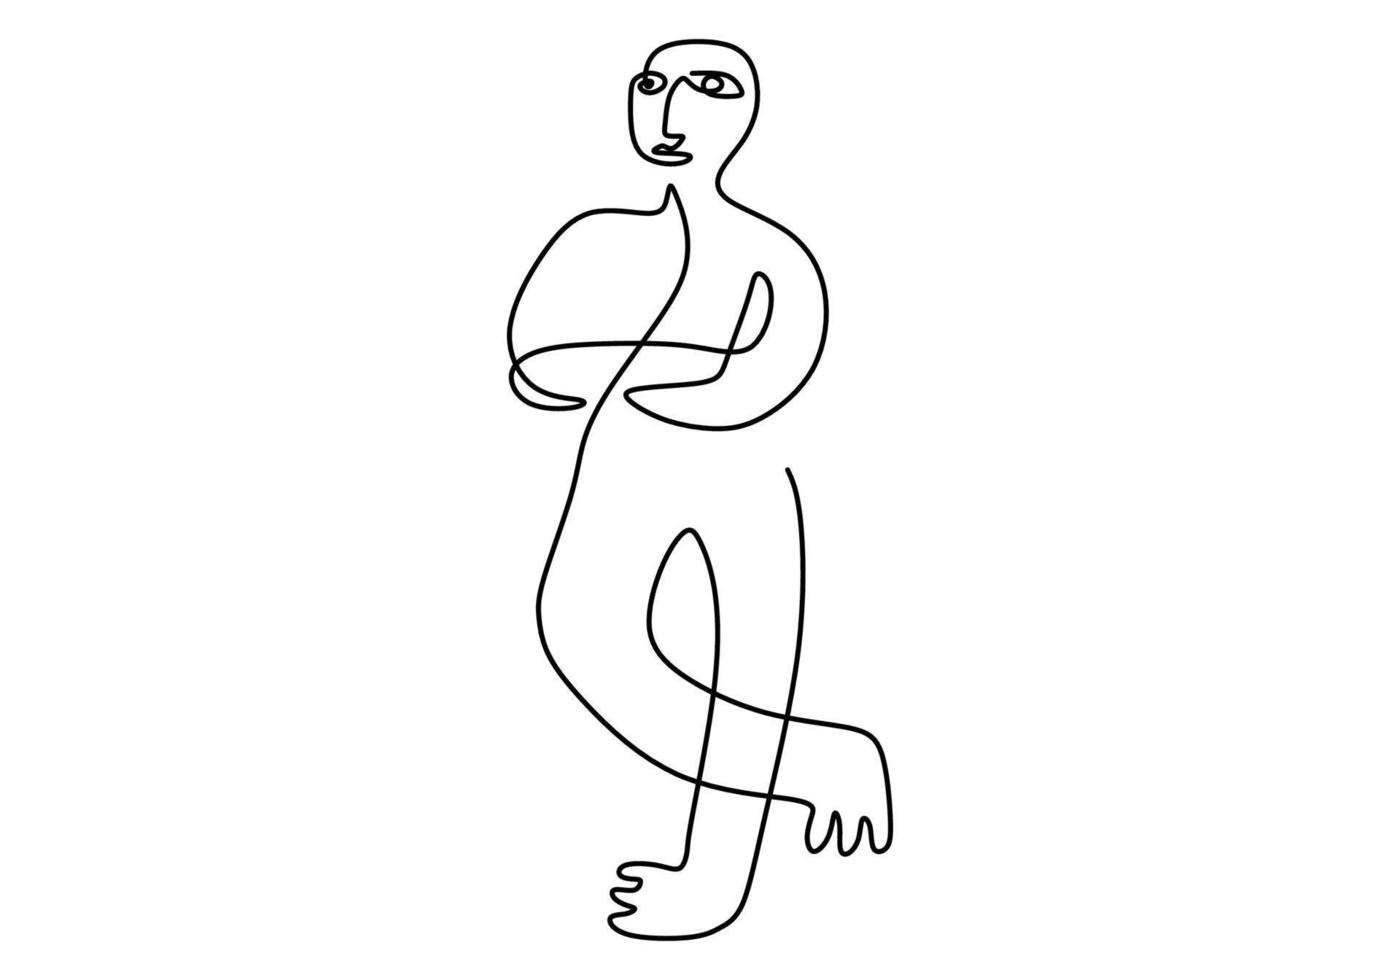 Hand drawn single line of primordial man body and face vector